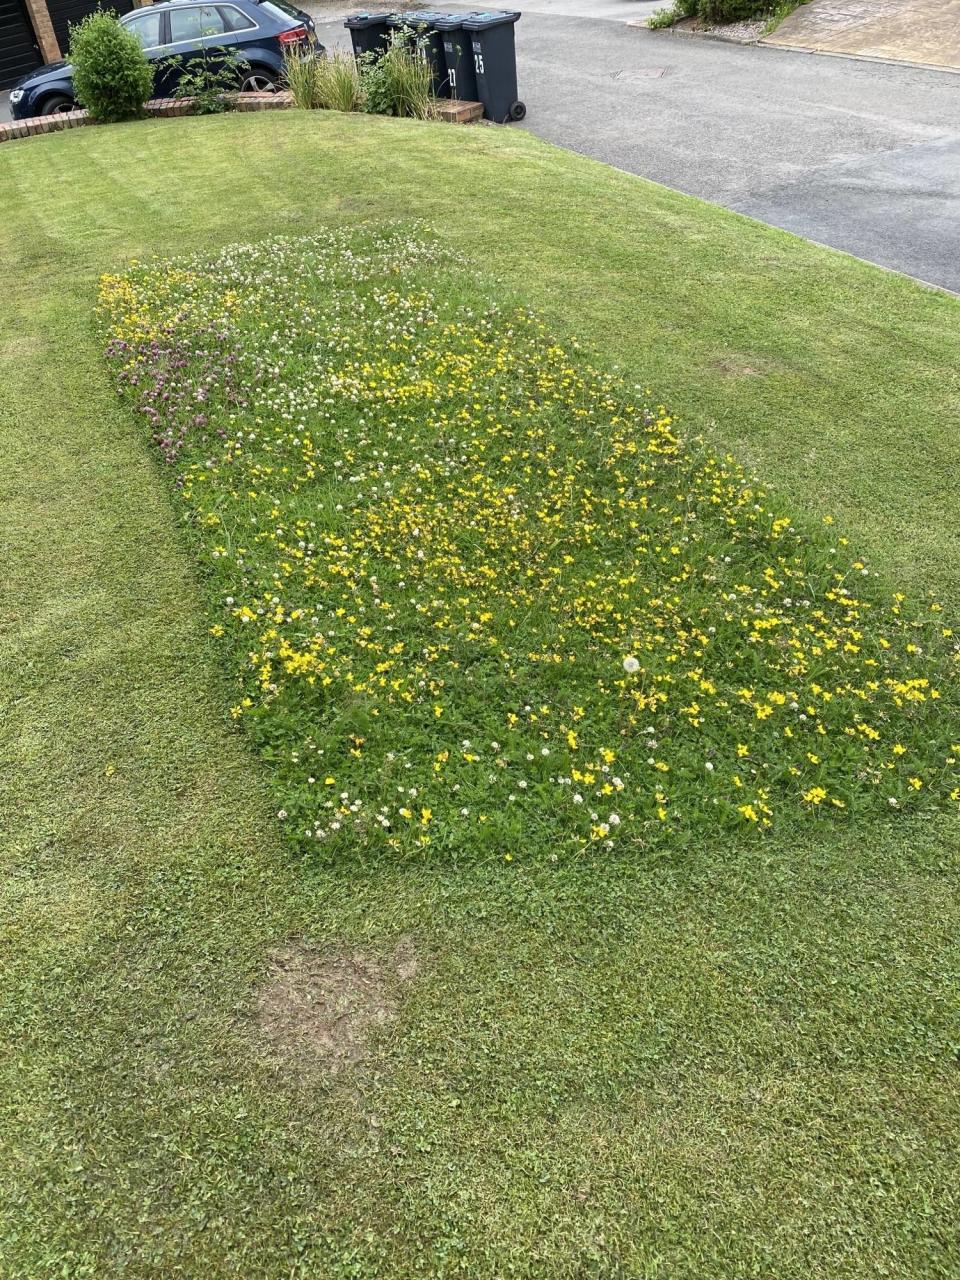 patch of flowers in the lawn